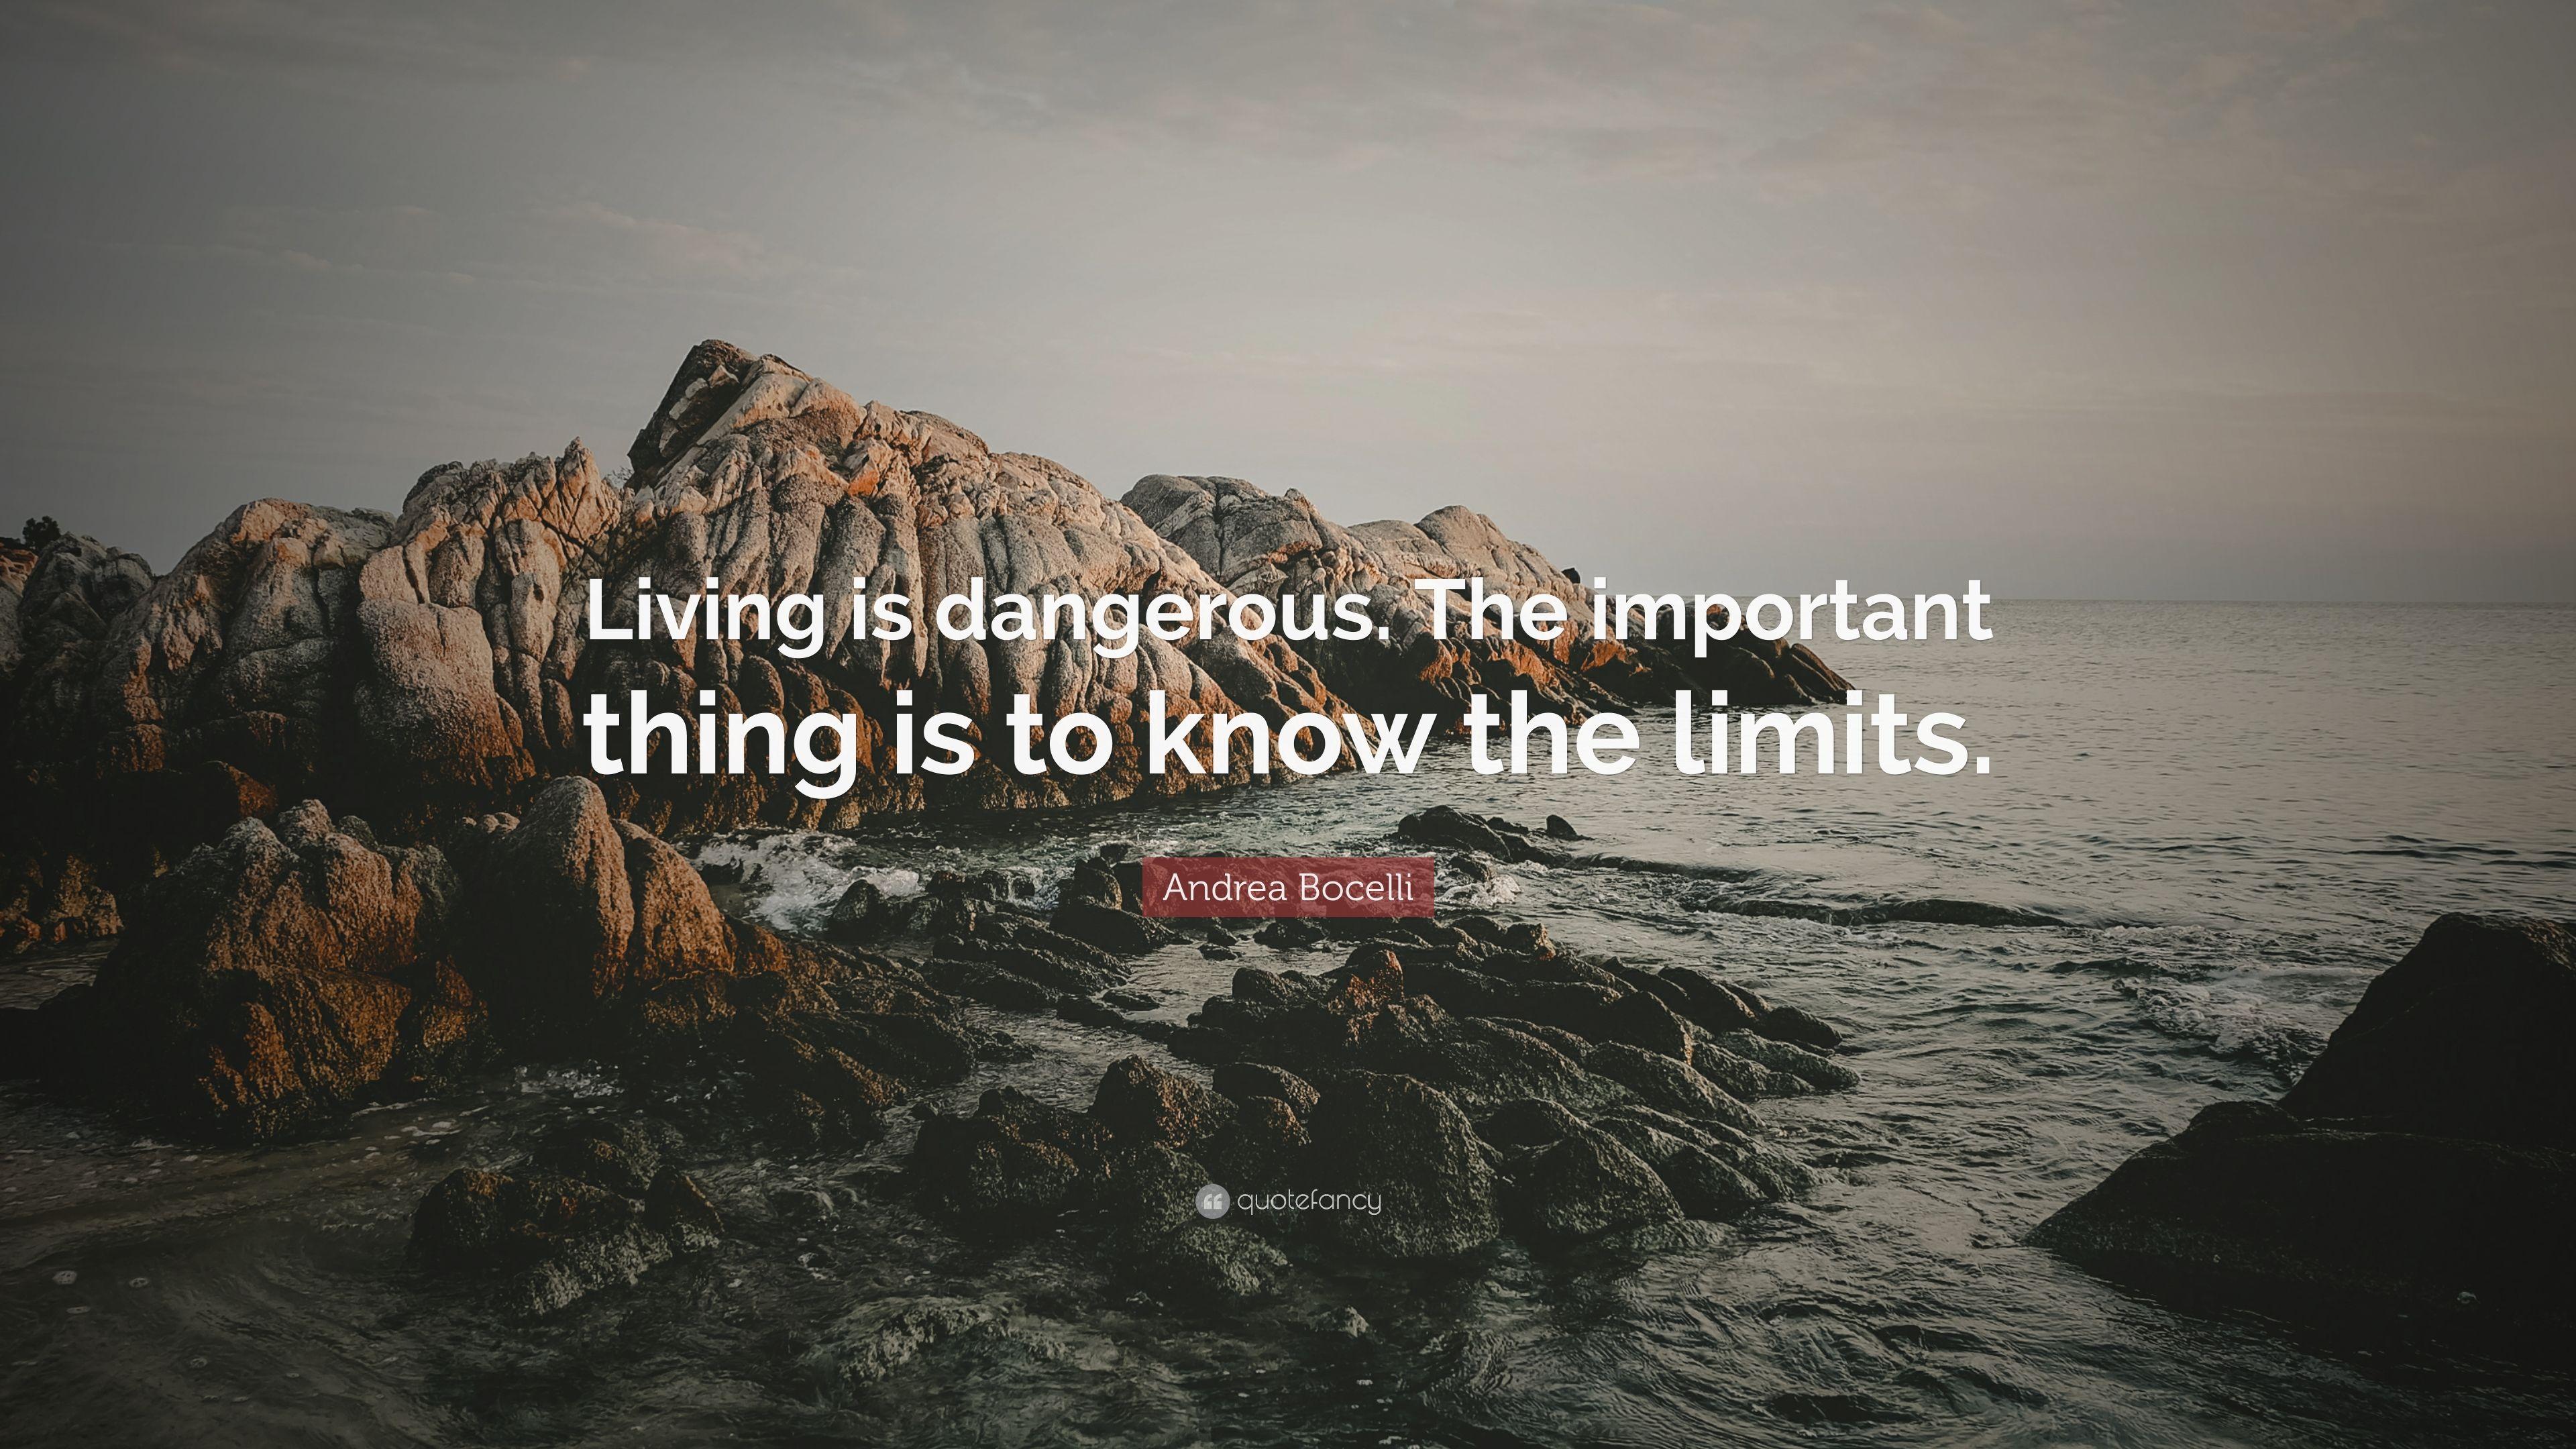 Andrea Bocelli Quote: “Living is dangerous. The important thing is